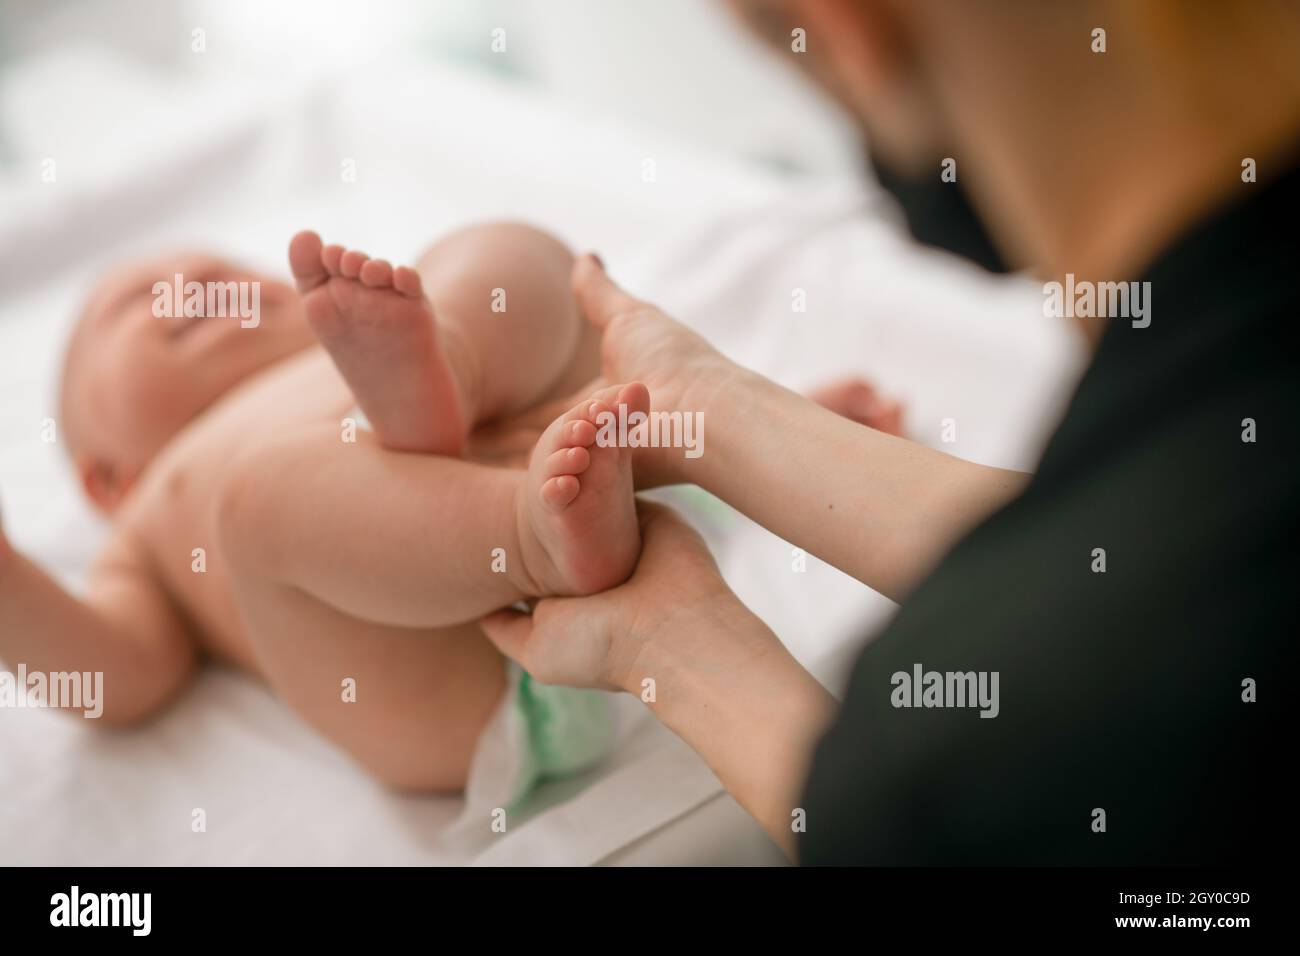 Pediatric patient being tested for neonatal reflexes Stock Photo